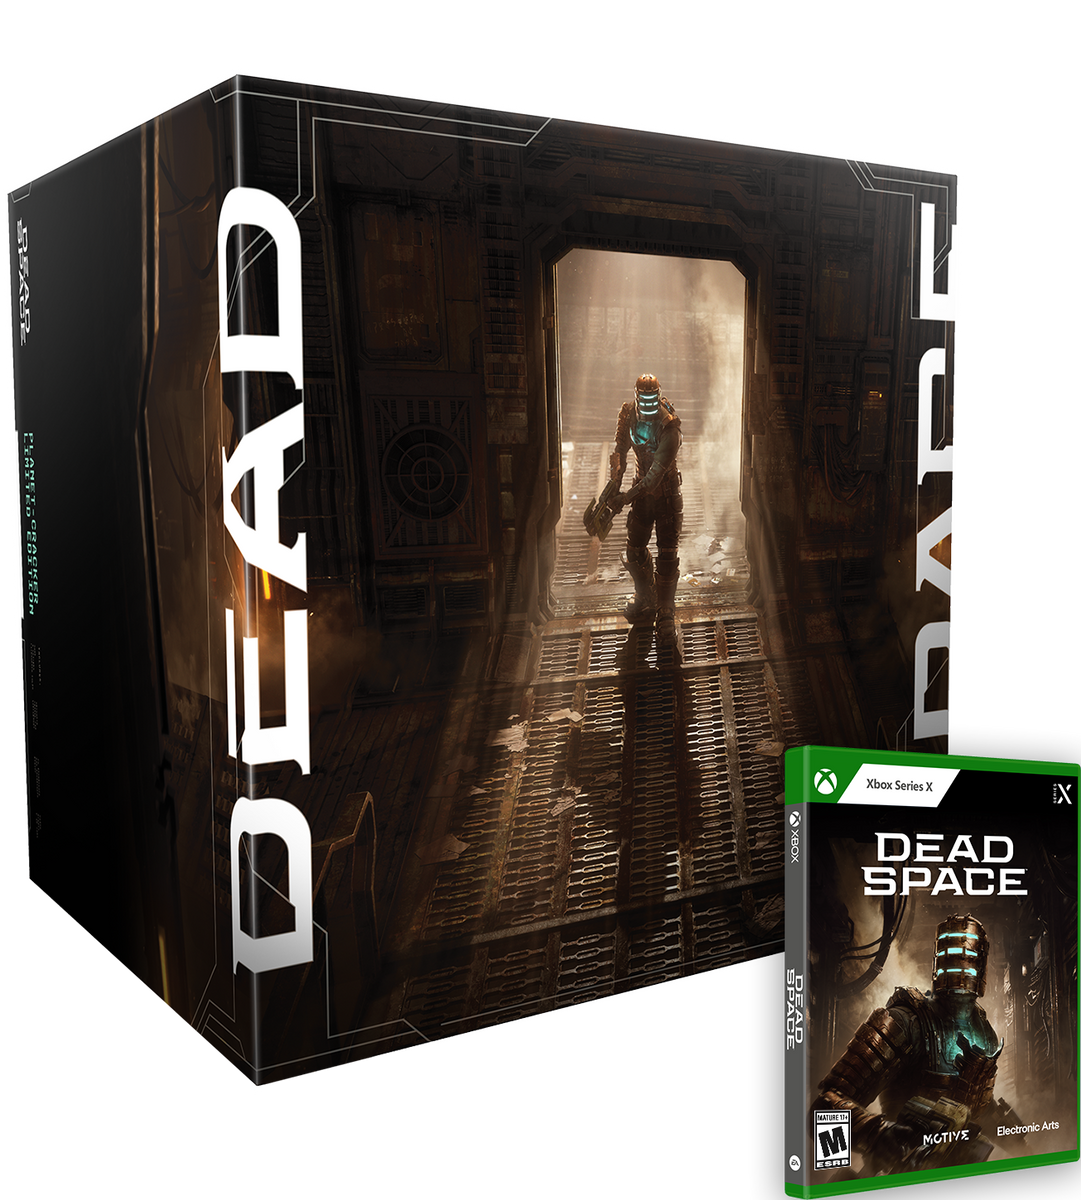 Dead Space Collector's Edition (Xbox Series X) – Limited Run Games